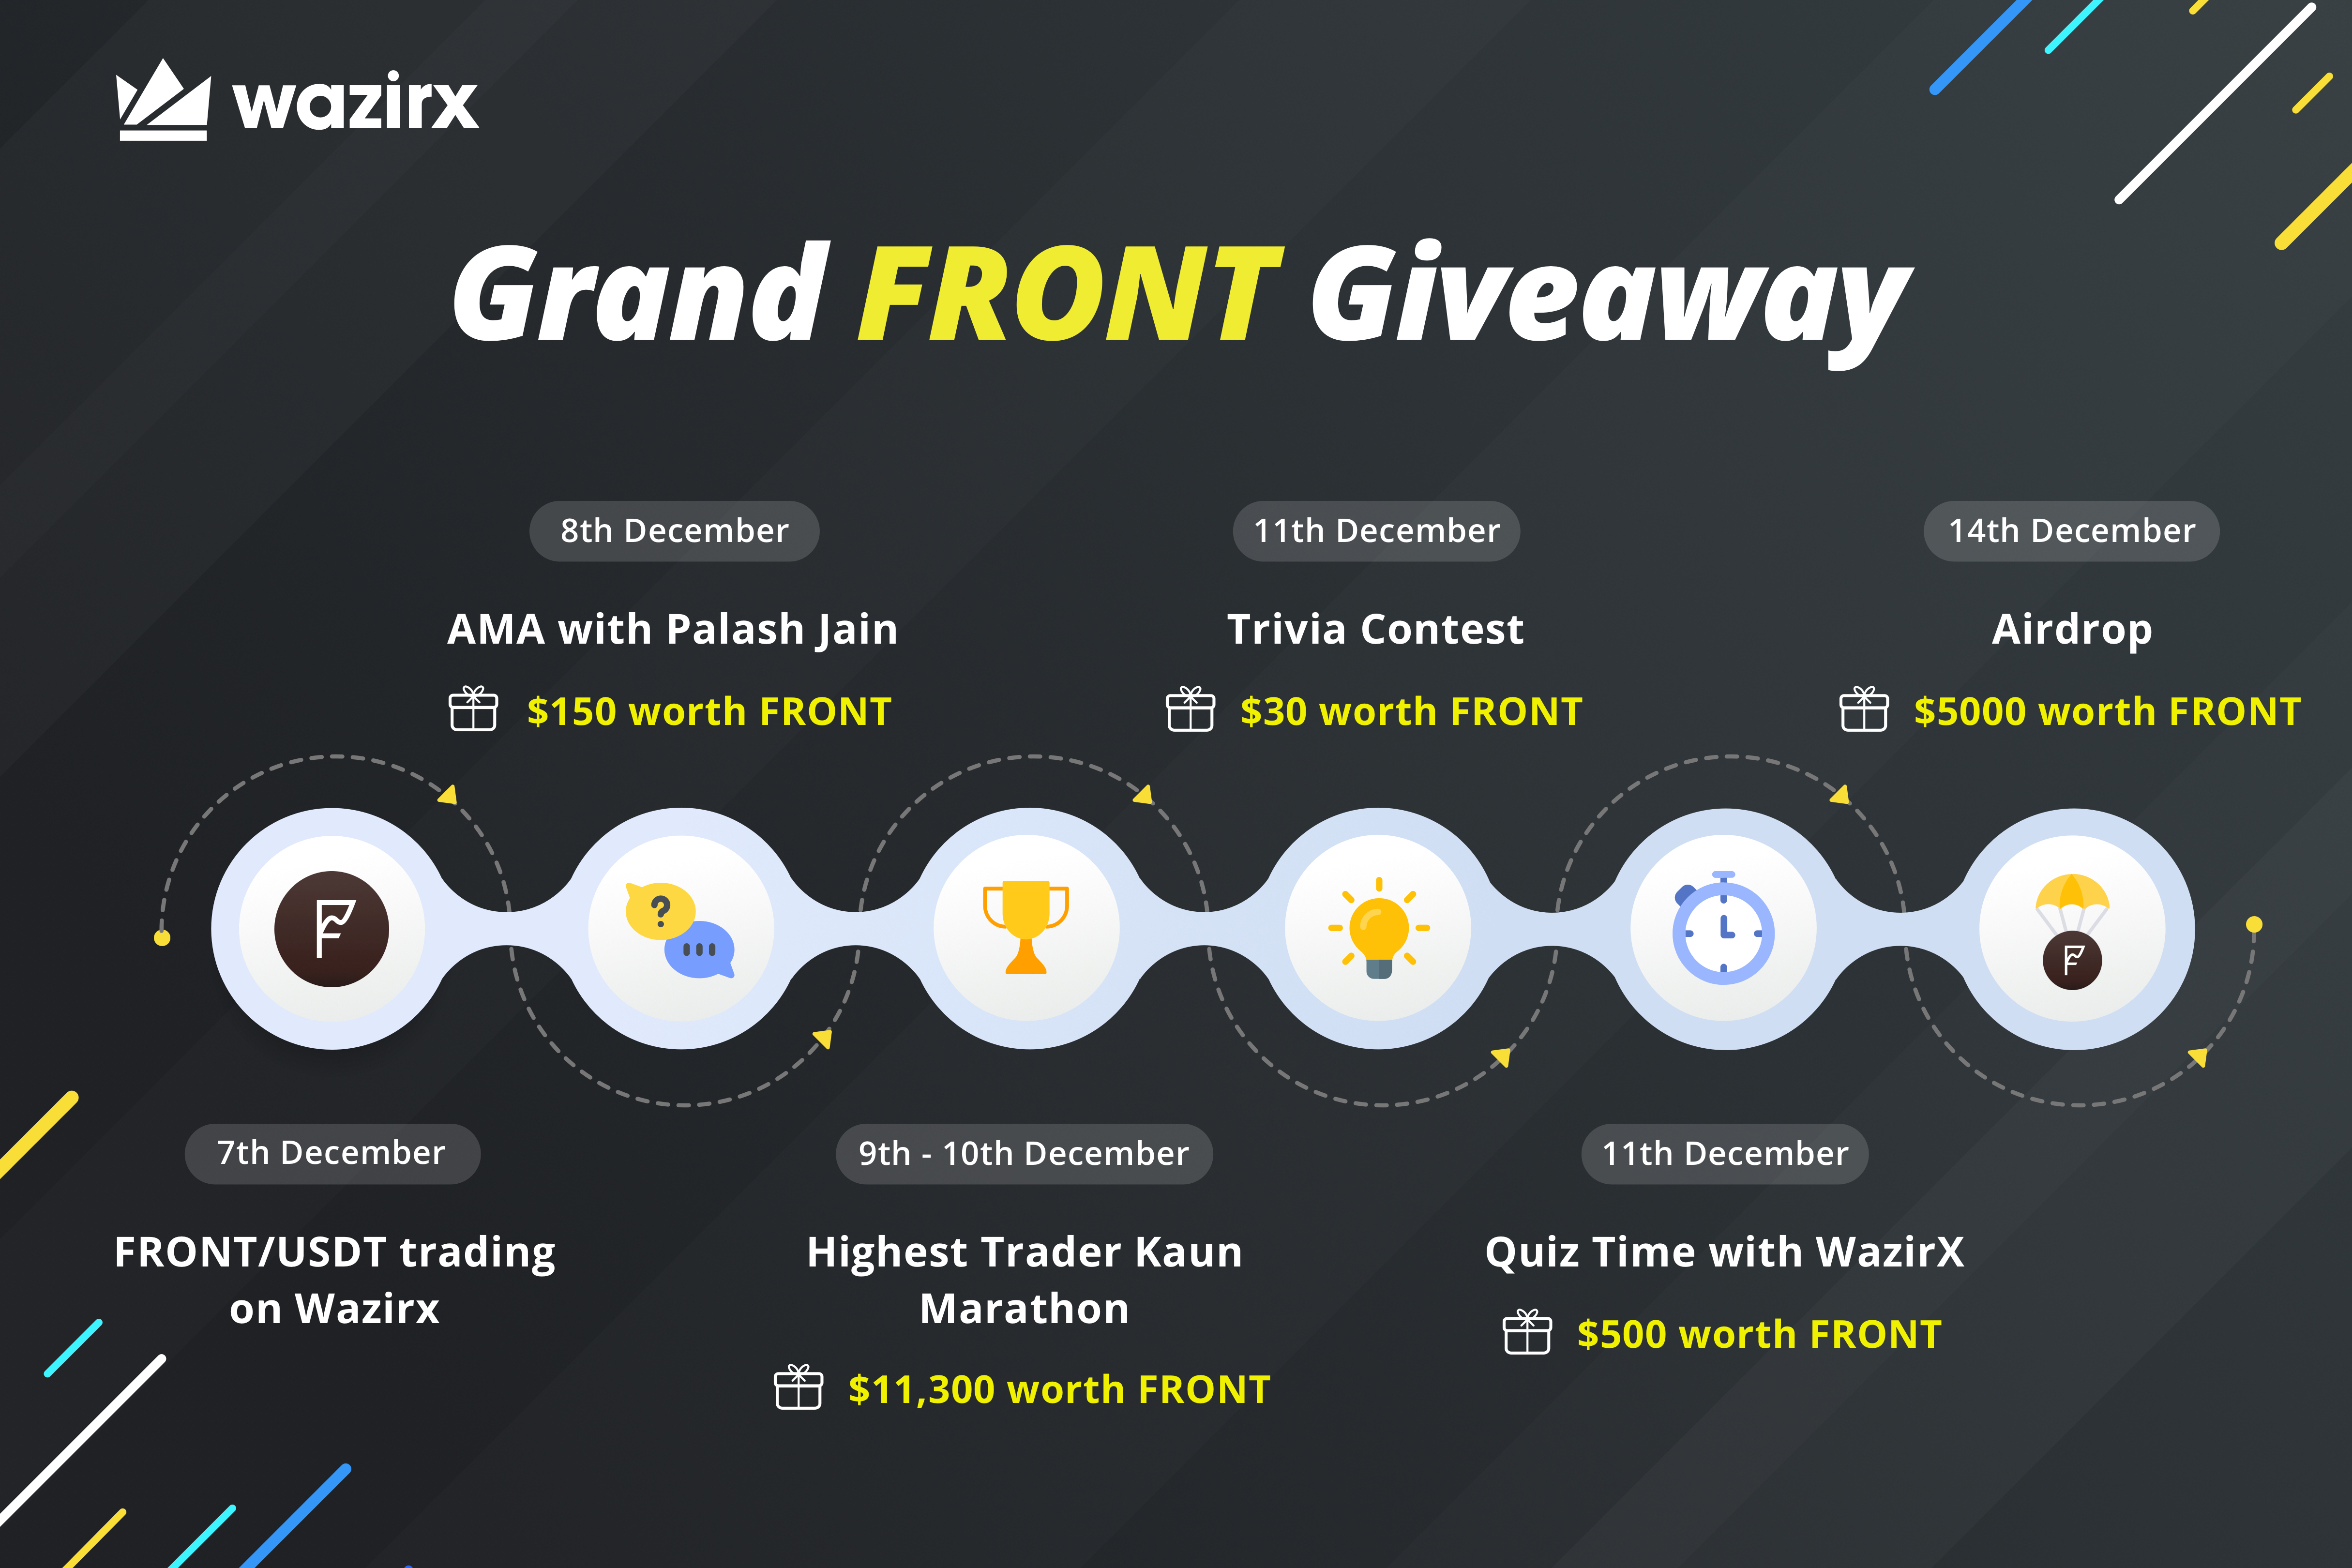 Grand FRONT Giveaway on WazirX